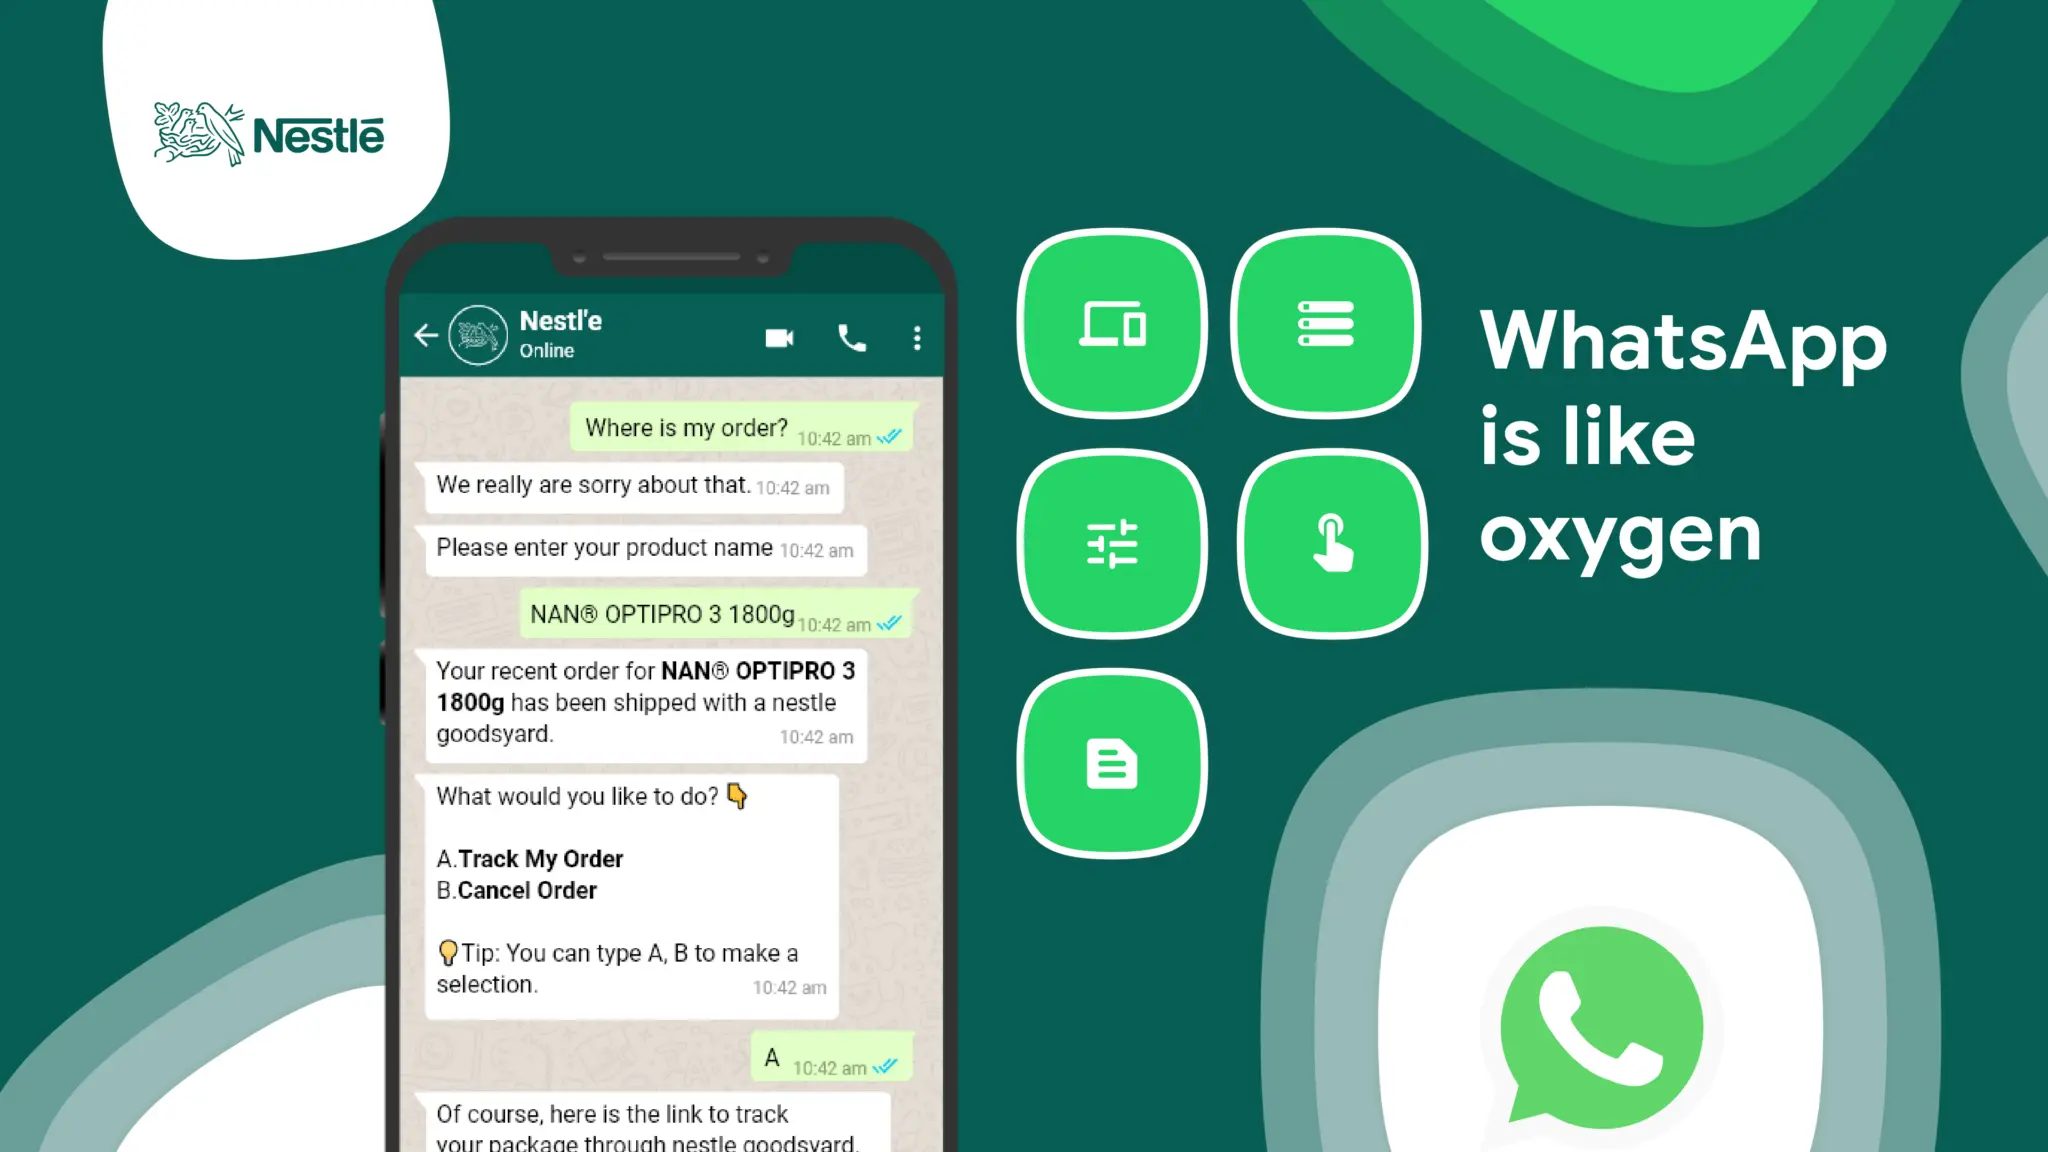 Why WhatsApp’s Design makes it such a powerhouse for chatbots